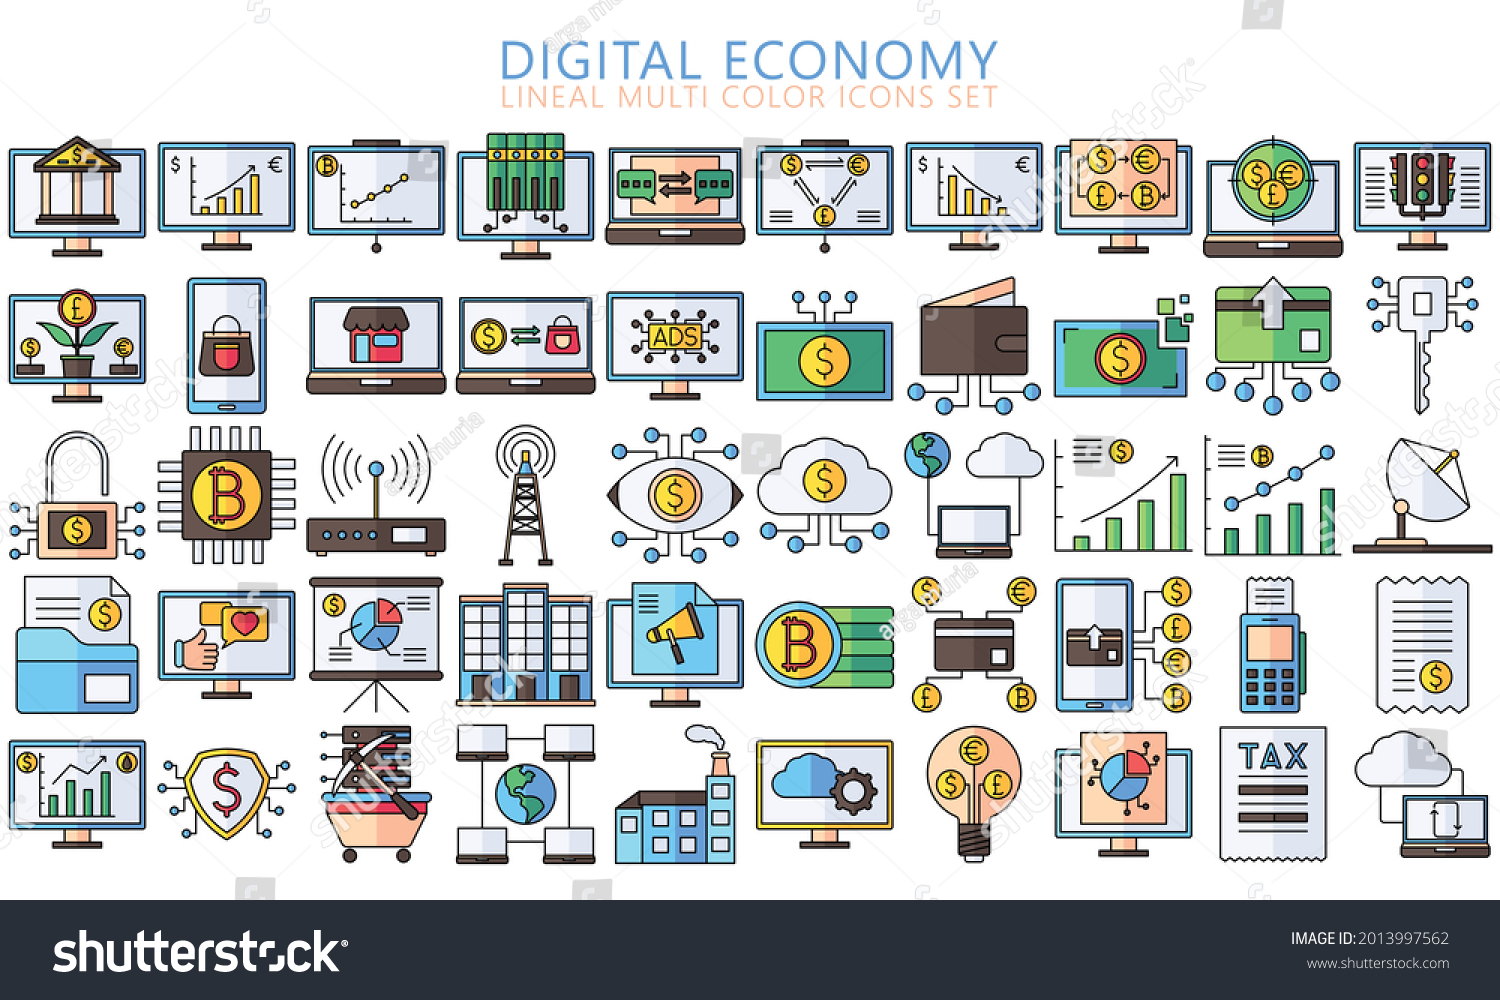 SVG of Digital Economy lineal multi-color icons set, contain such as computer, crypto currency, diagram, finance symbol, Used for modern concepts, web, UI or UX kit and applications. ready convert to SVG svg